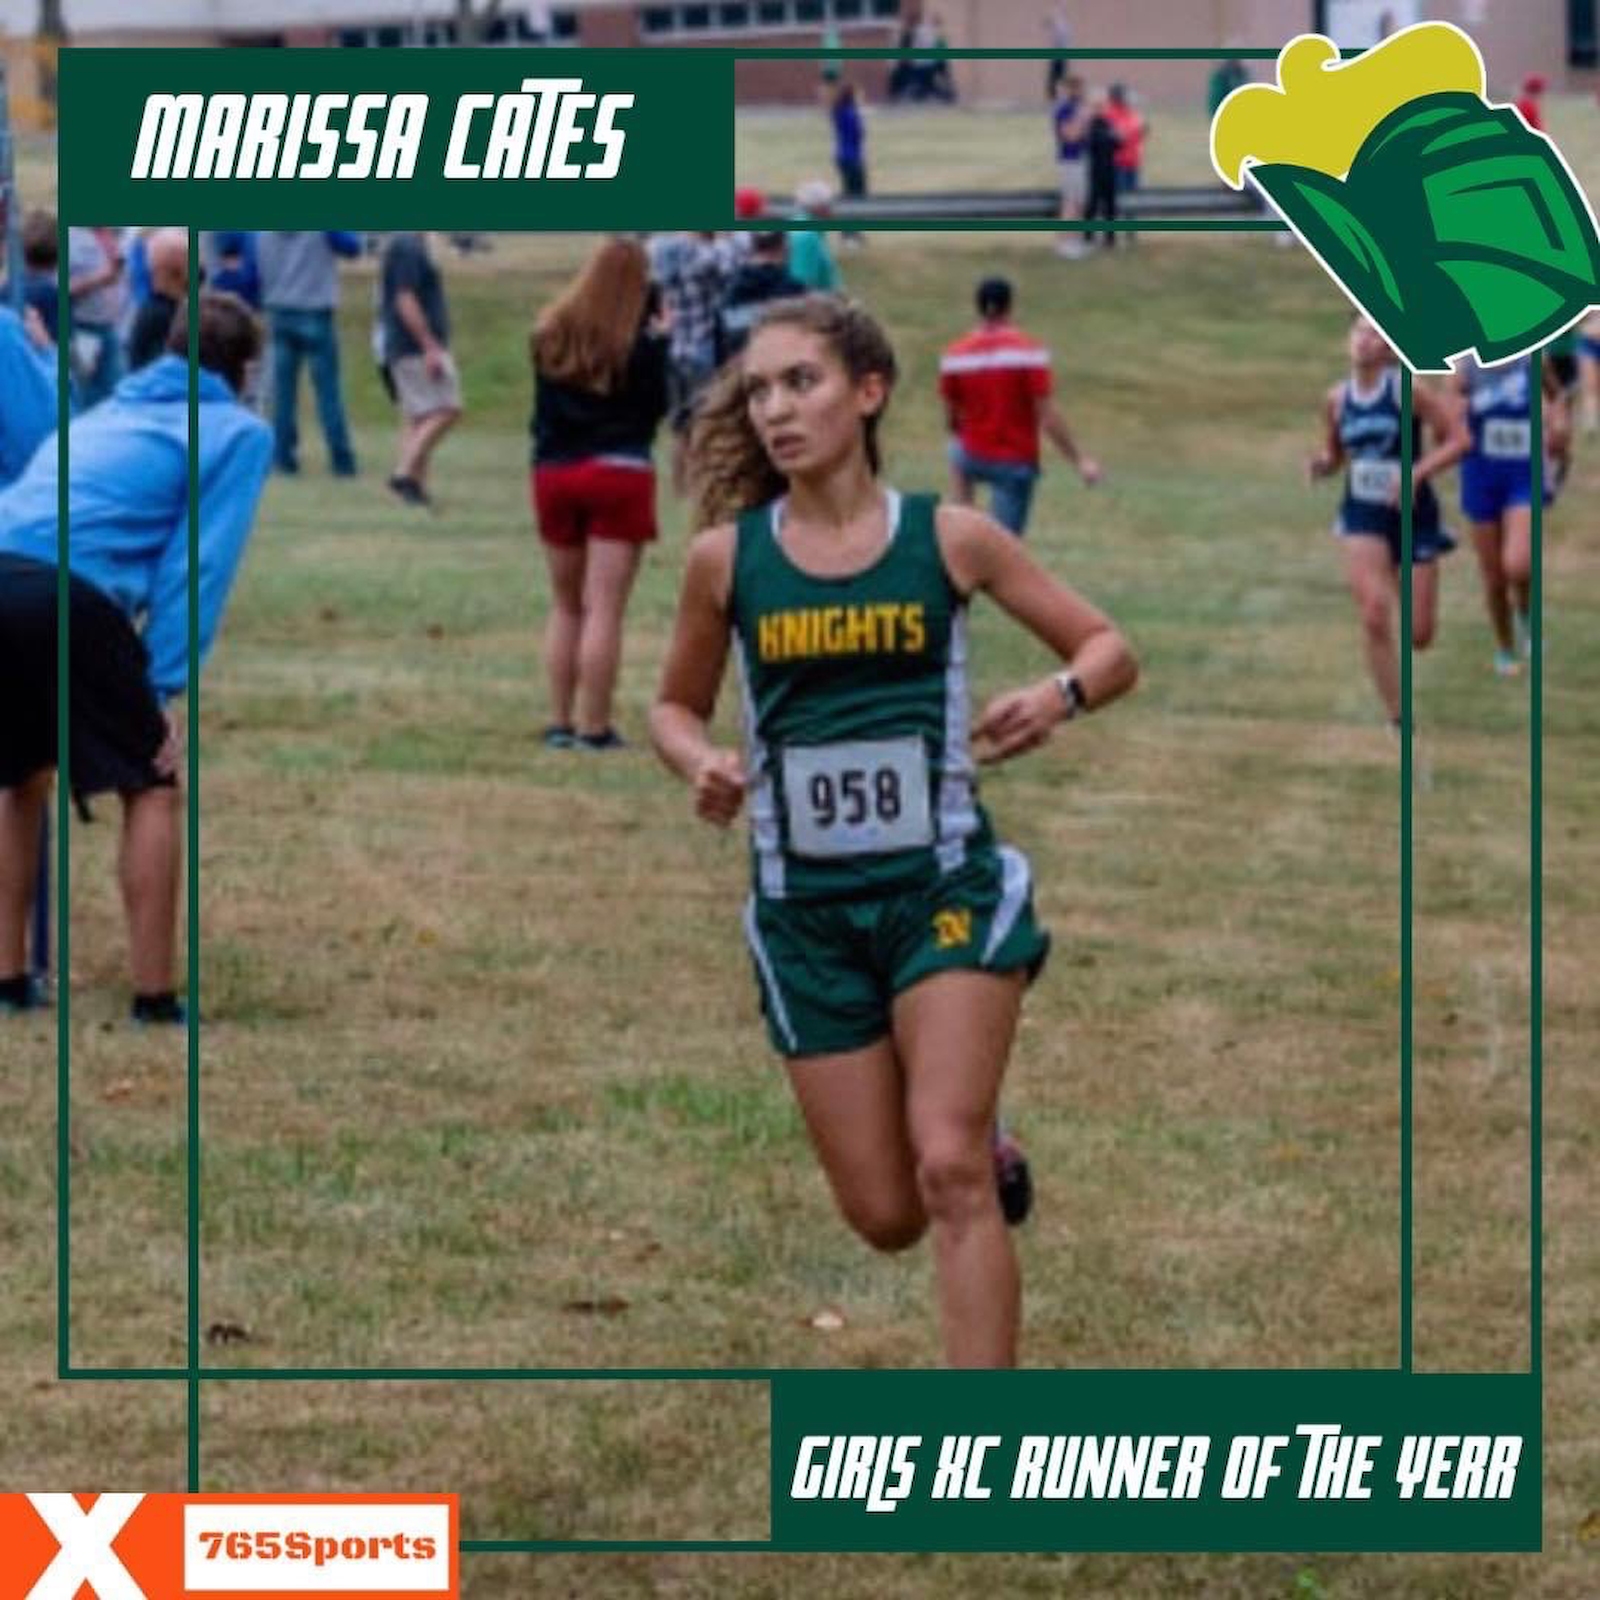 Marissa Cates & Grant Luebbe Named Runners of the Year gallery cover photo